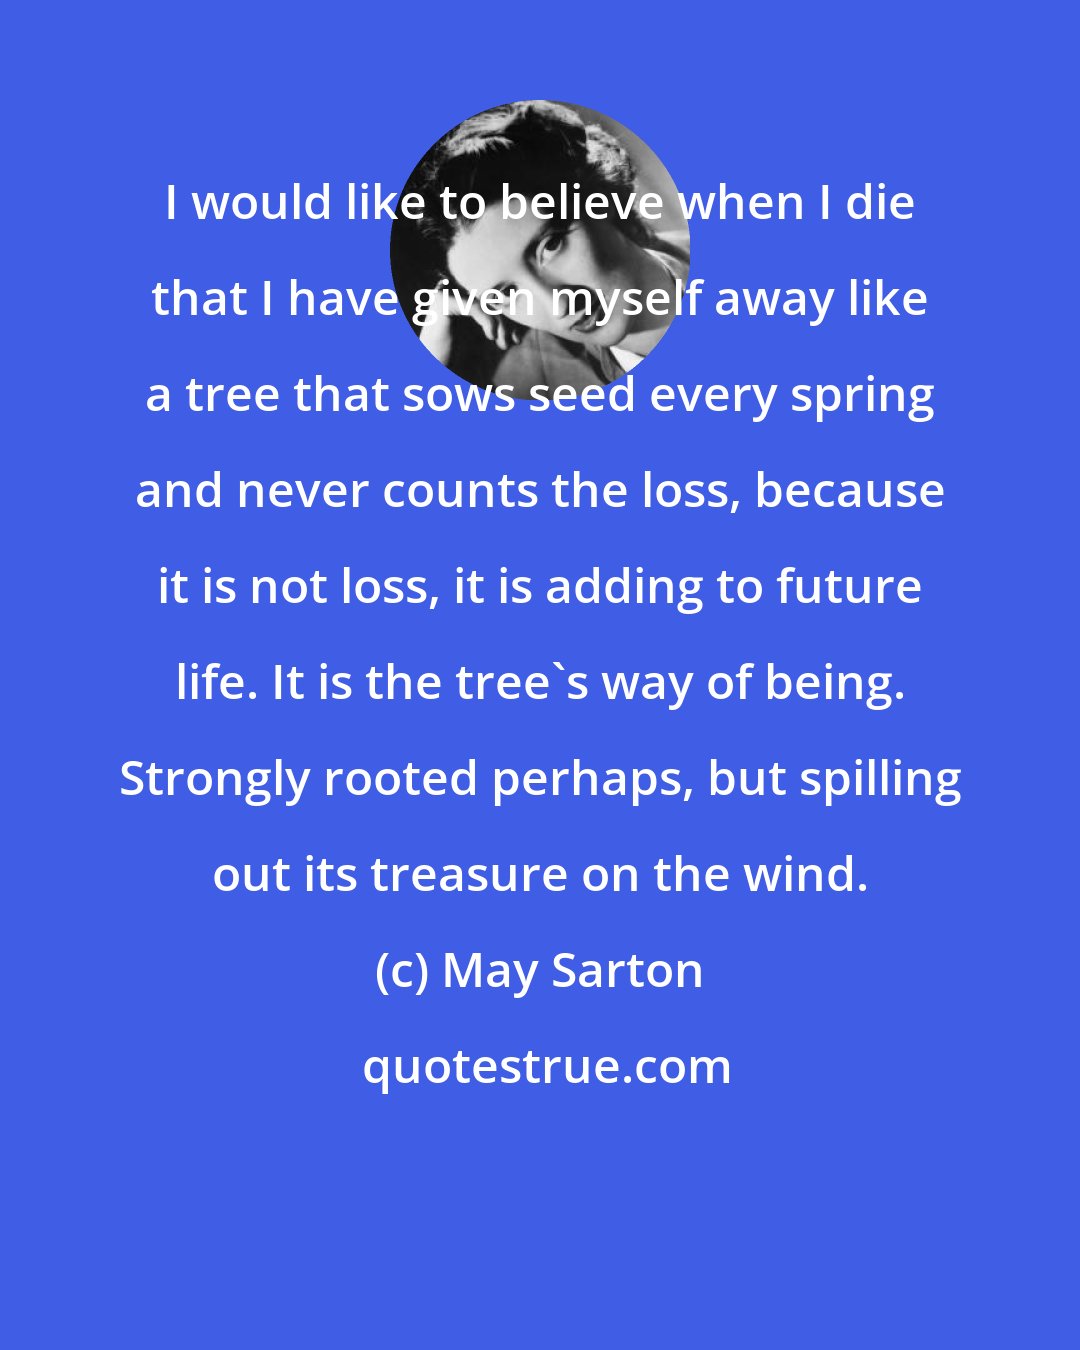 May Sarton: I would like to believe when I die that I have given myself away like a tree that sows seed every spring and never counts the loss, because it is not loss, it is adding to future life. It is the tree's way of being. Strongly rooted perhaps, but spilling out its treasure on the wind.